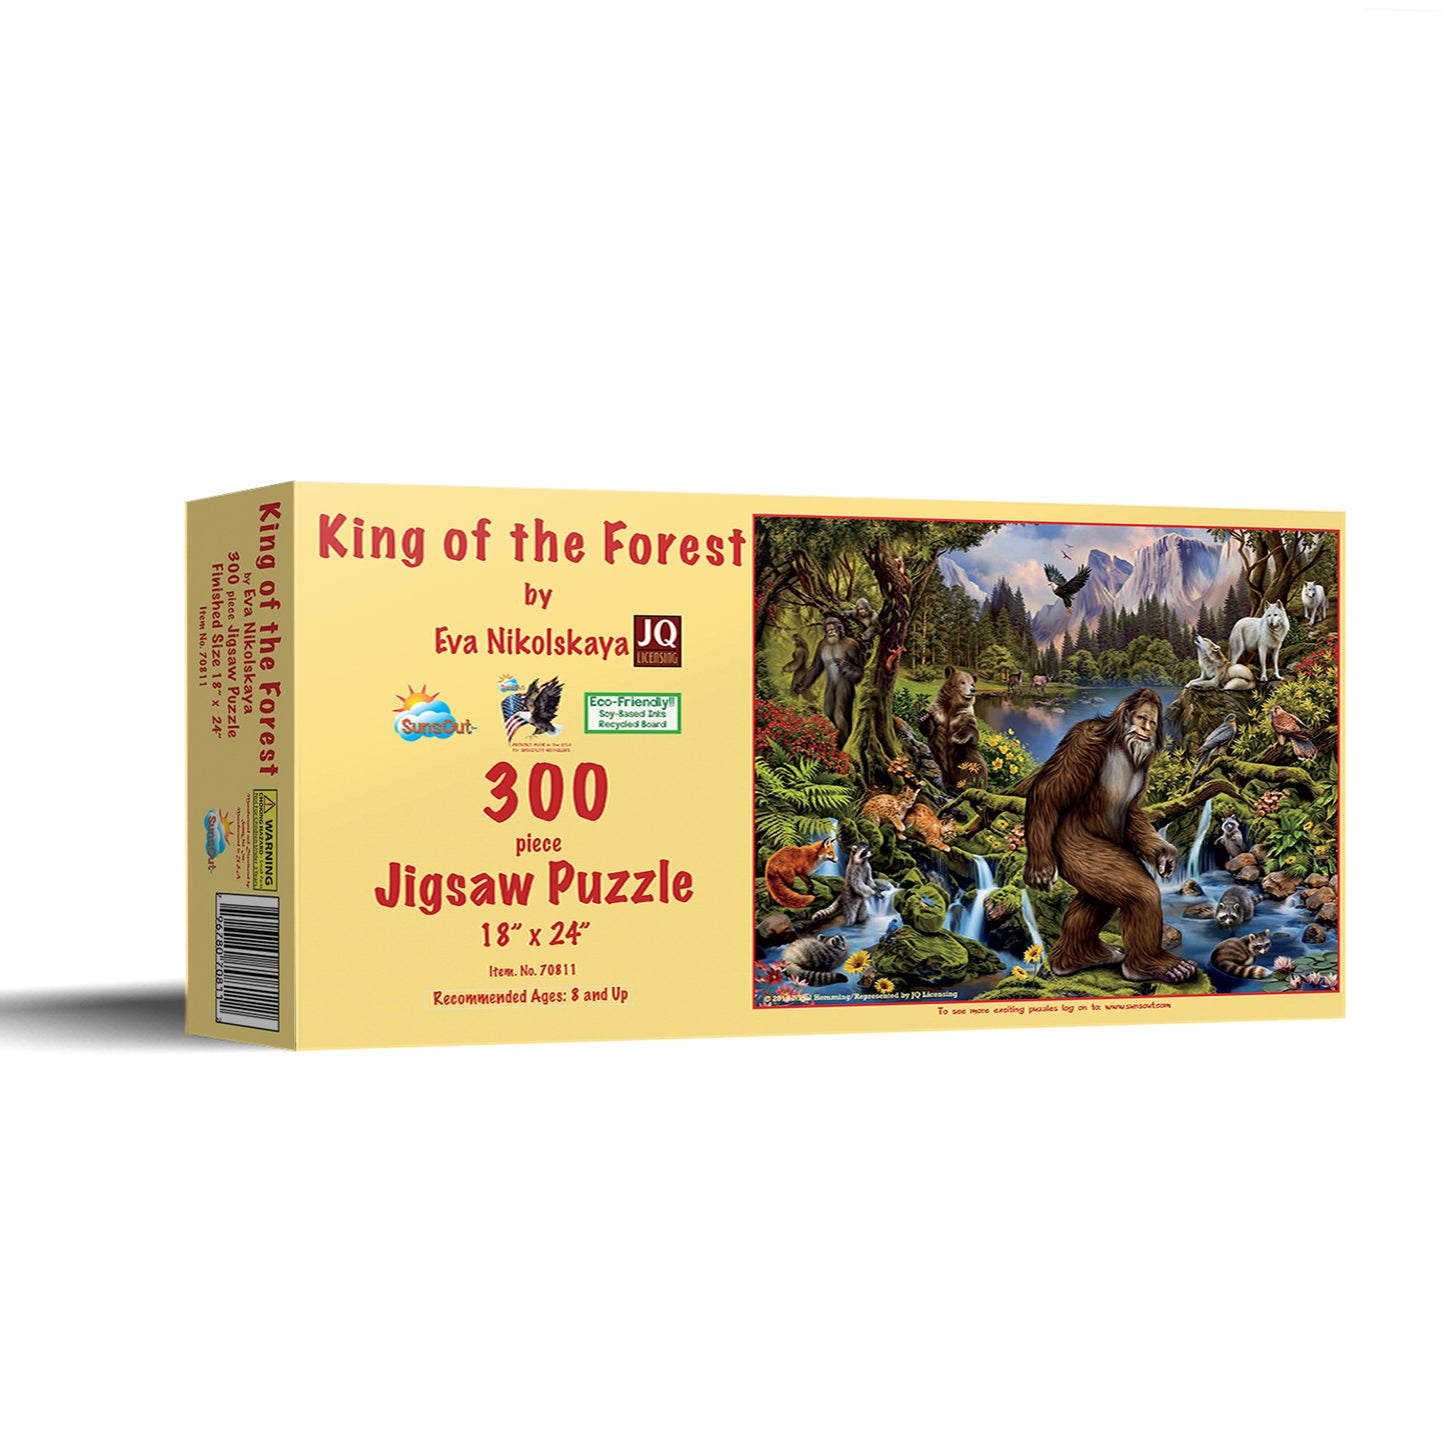 King of the Forest - 300 Piece Jigsaw Puzzle